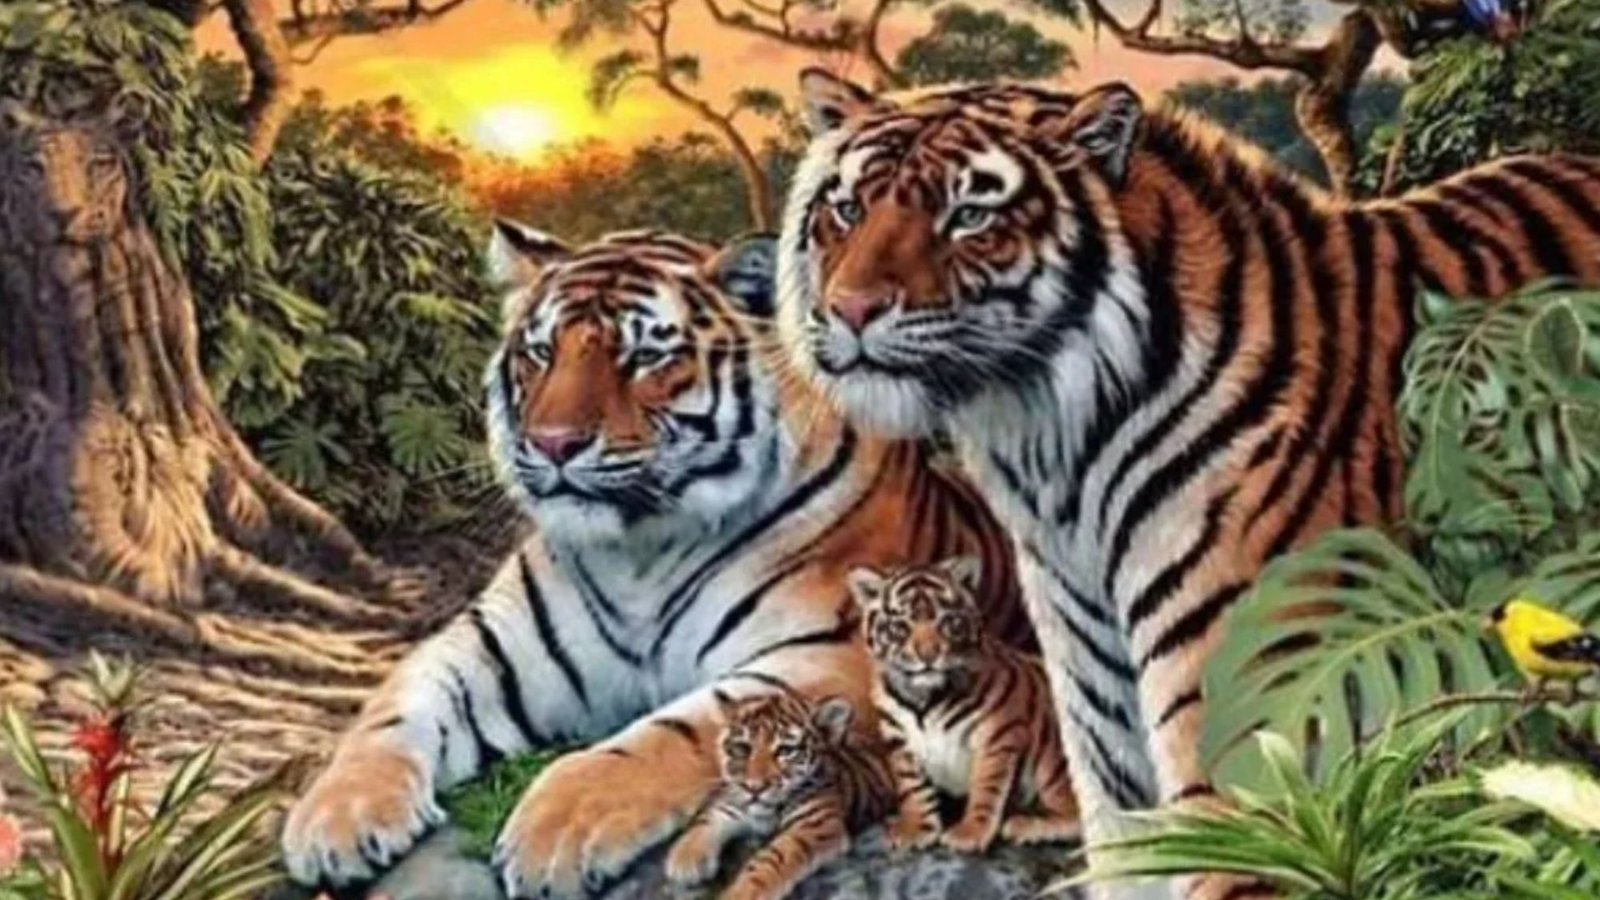 Everyone can see the tigers but you have 2020 vision if you can spot their 12 relatives in the illusion in 22 seconds